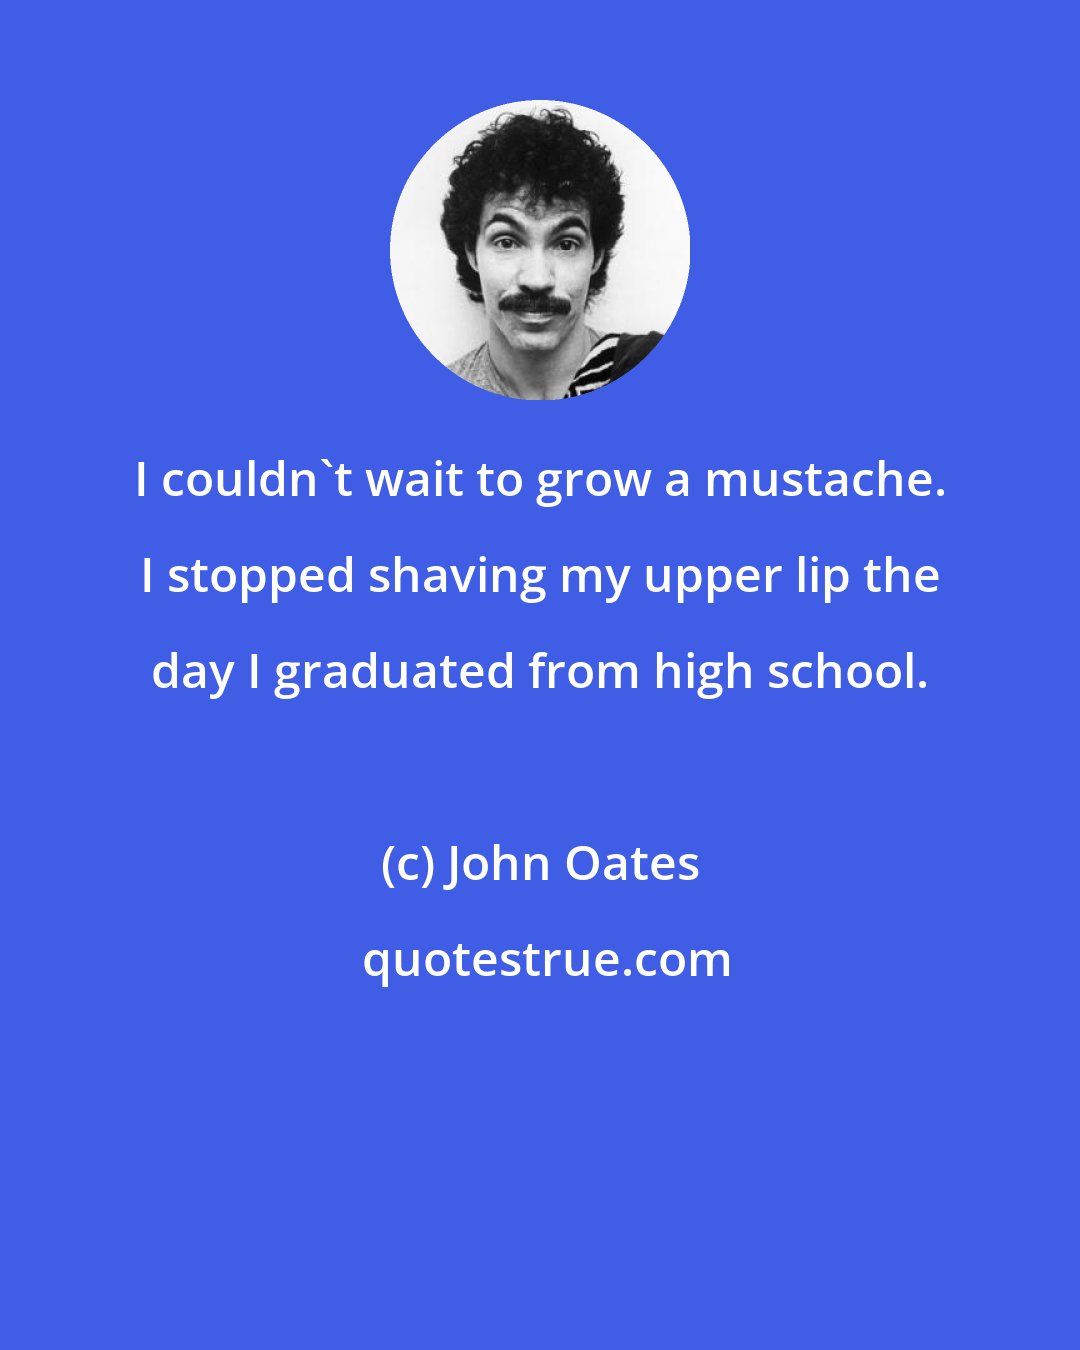 John Oates: I couldn't wait to grow a mustache. I stopped shaving my upper lip the day I graduated from high school.